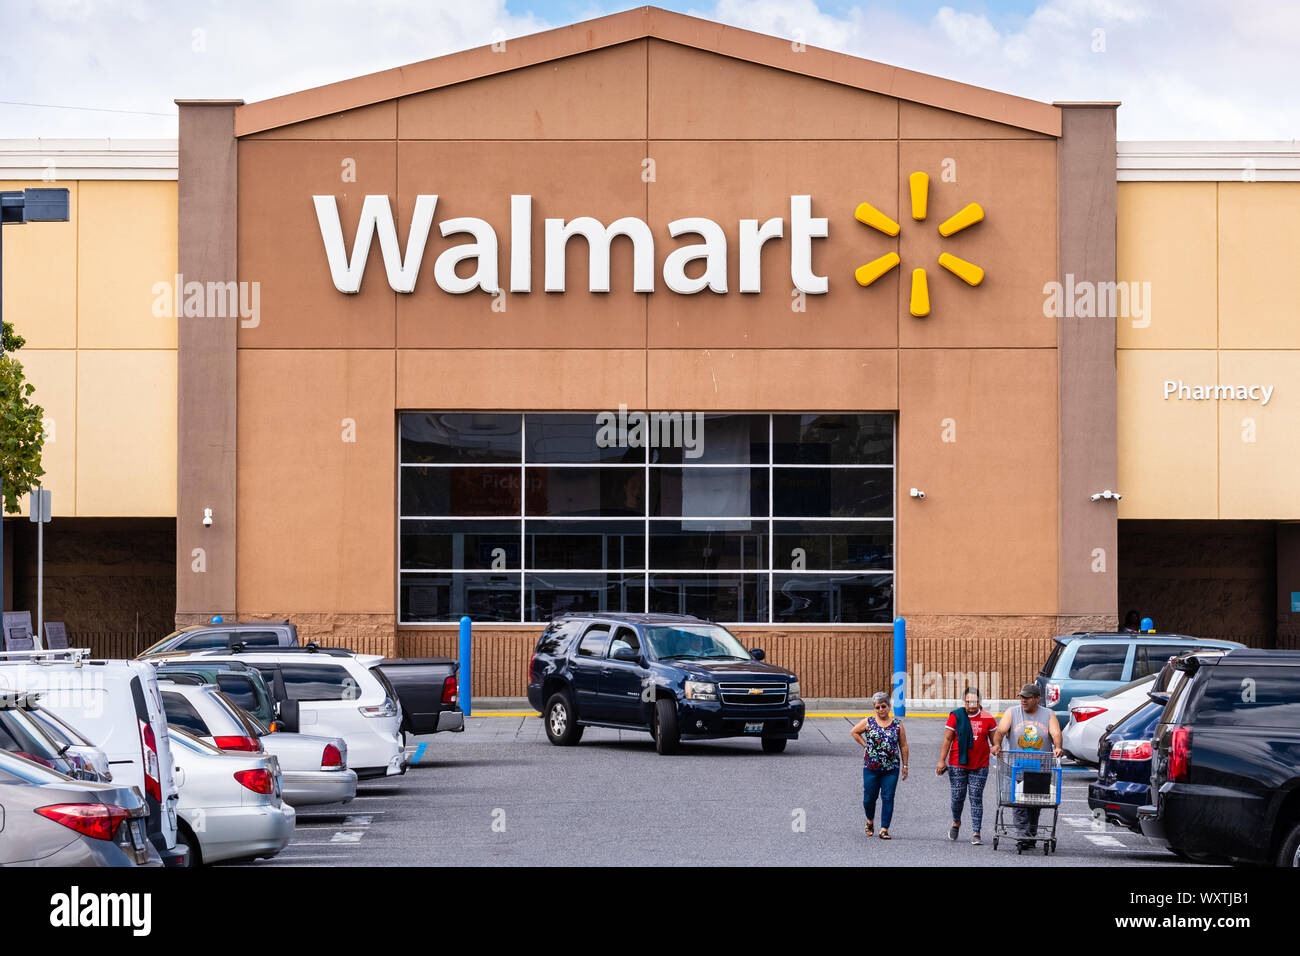 Sep 16, 2019 Fremont / CA / USA - Walmart store facade displaying the ...